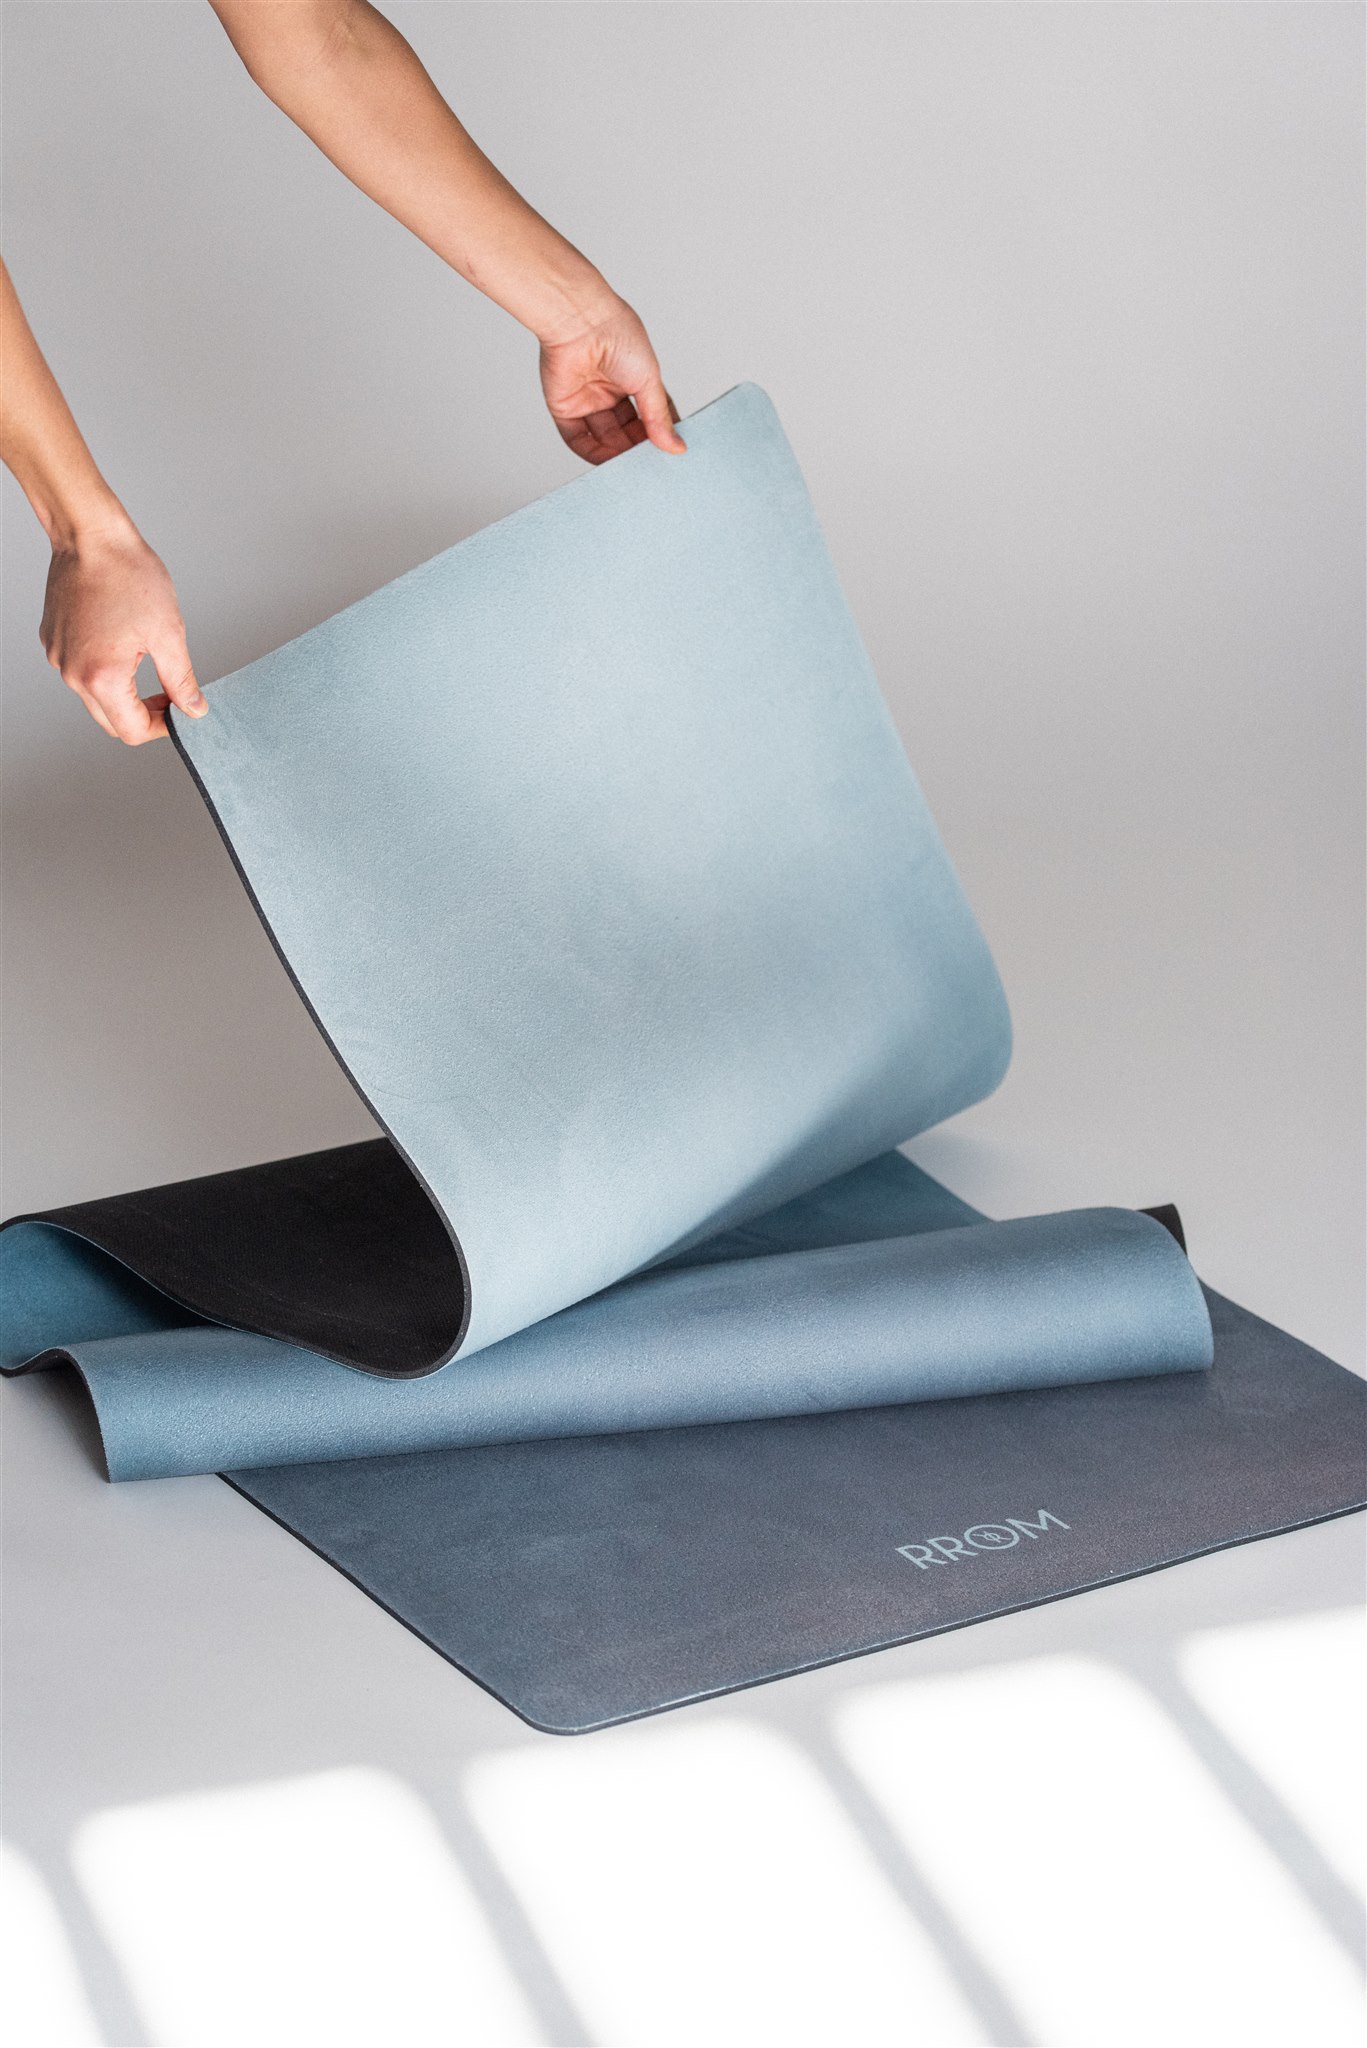 Foldable Suede Top Travel Yoga Mats